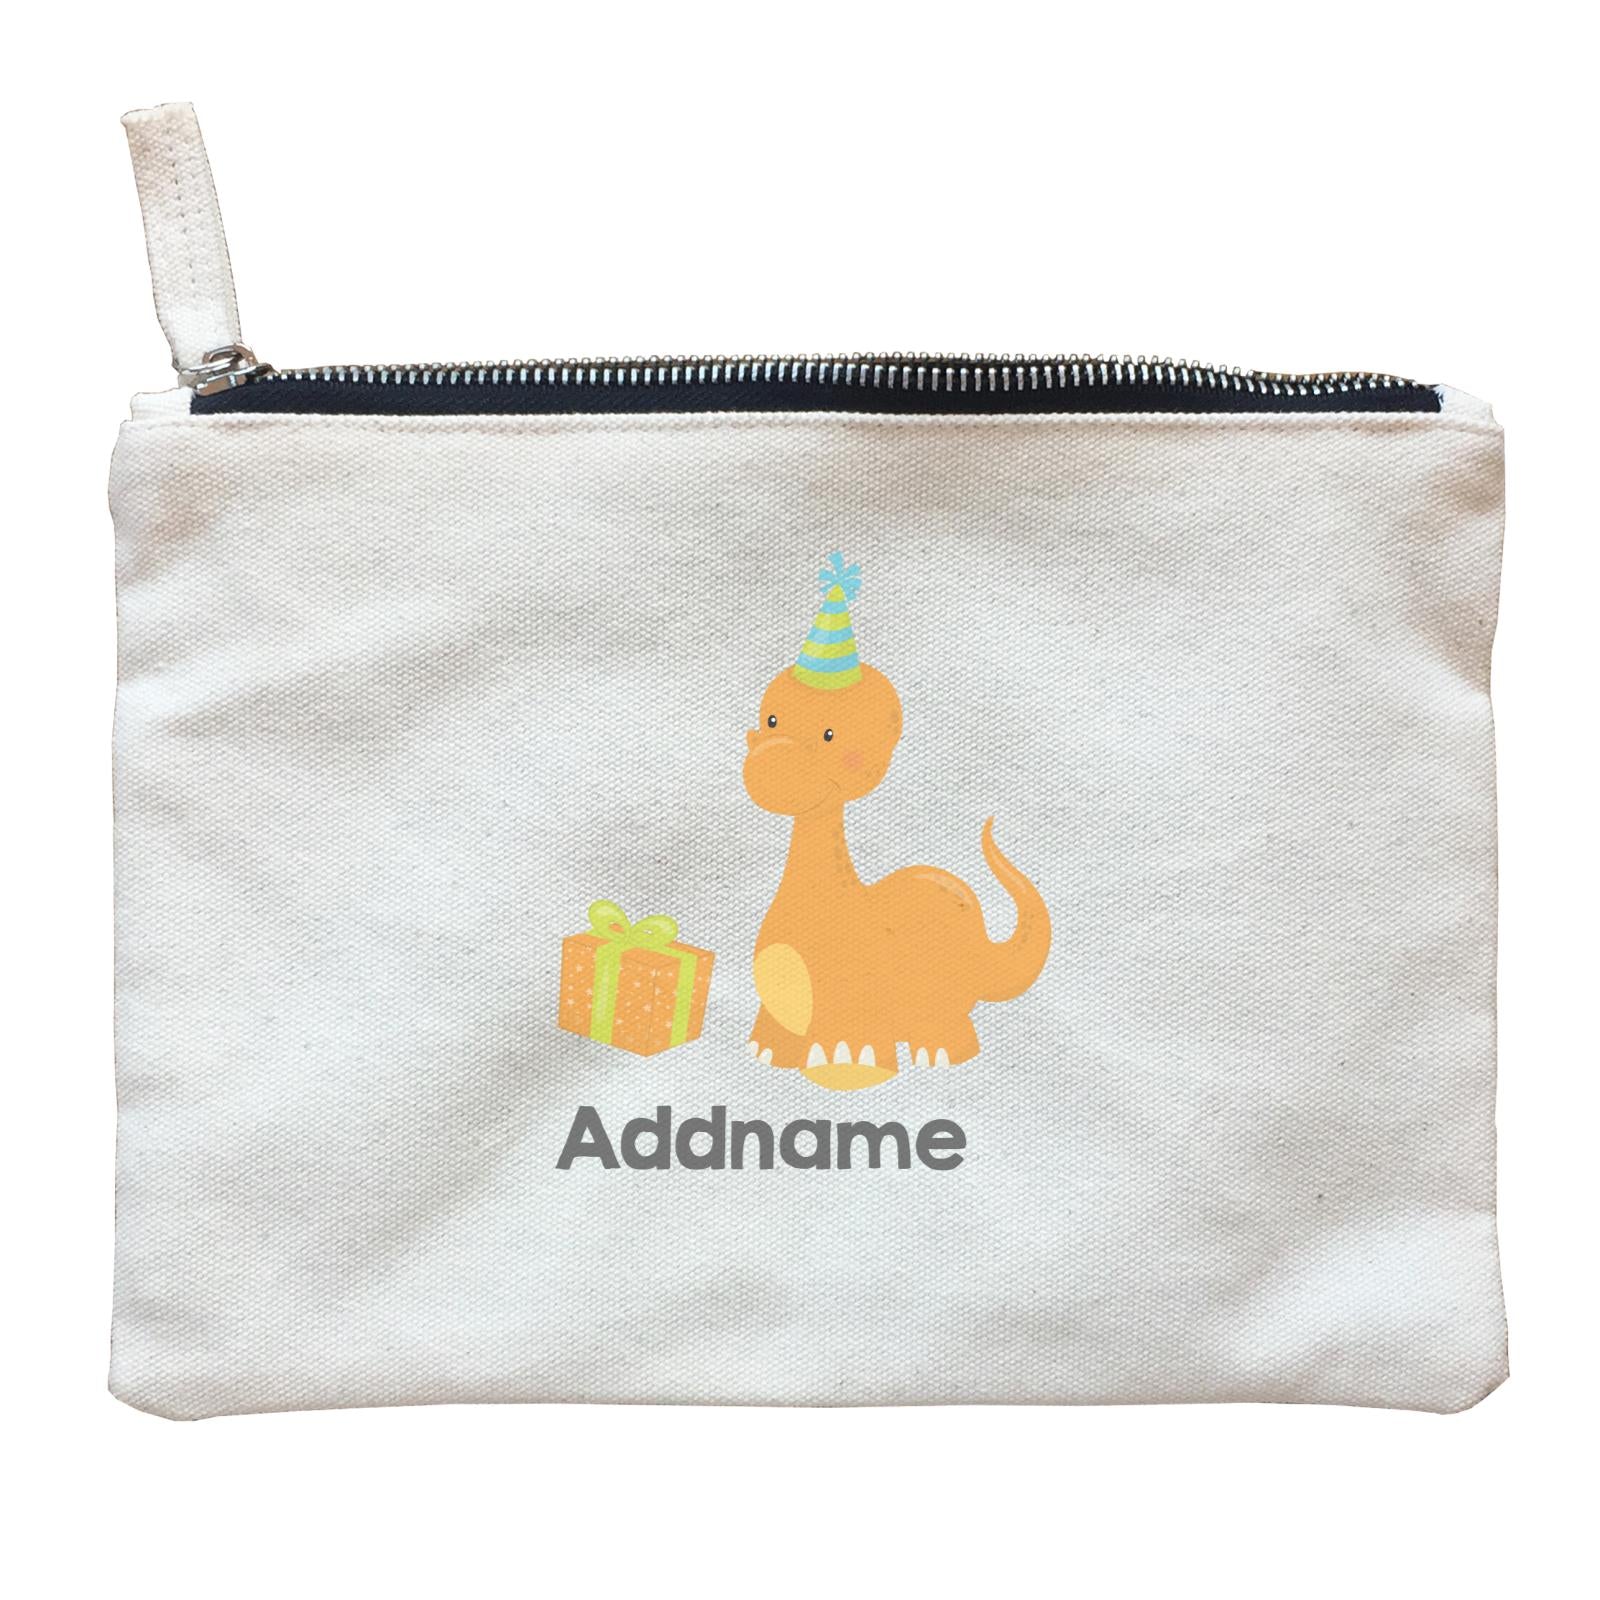 Dino Birthday Orange Long Neck WIth Birthday Gift and Hat Addname Zipper Pouch